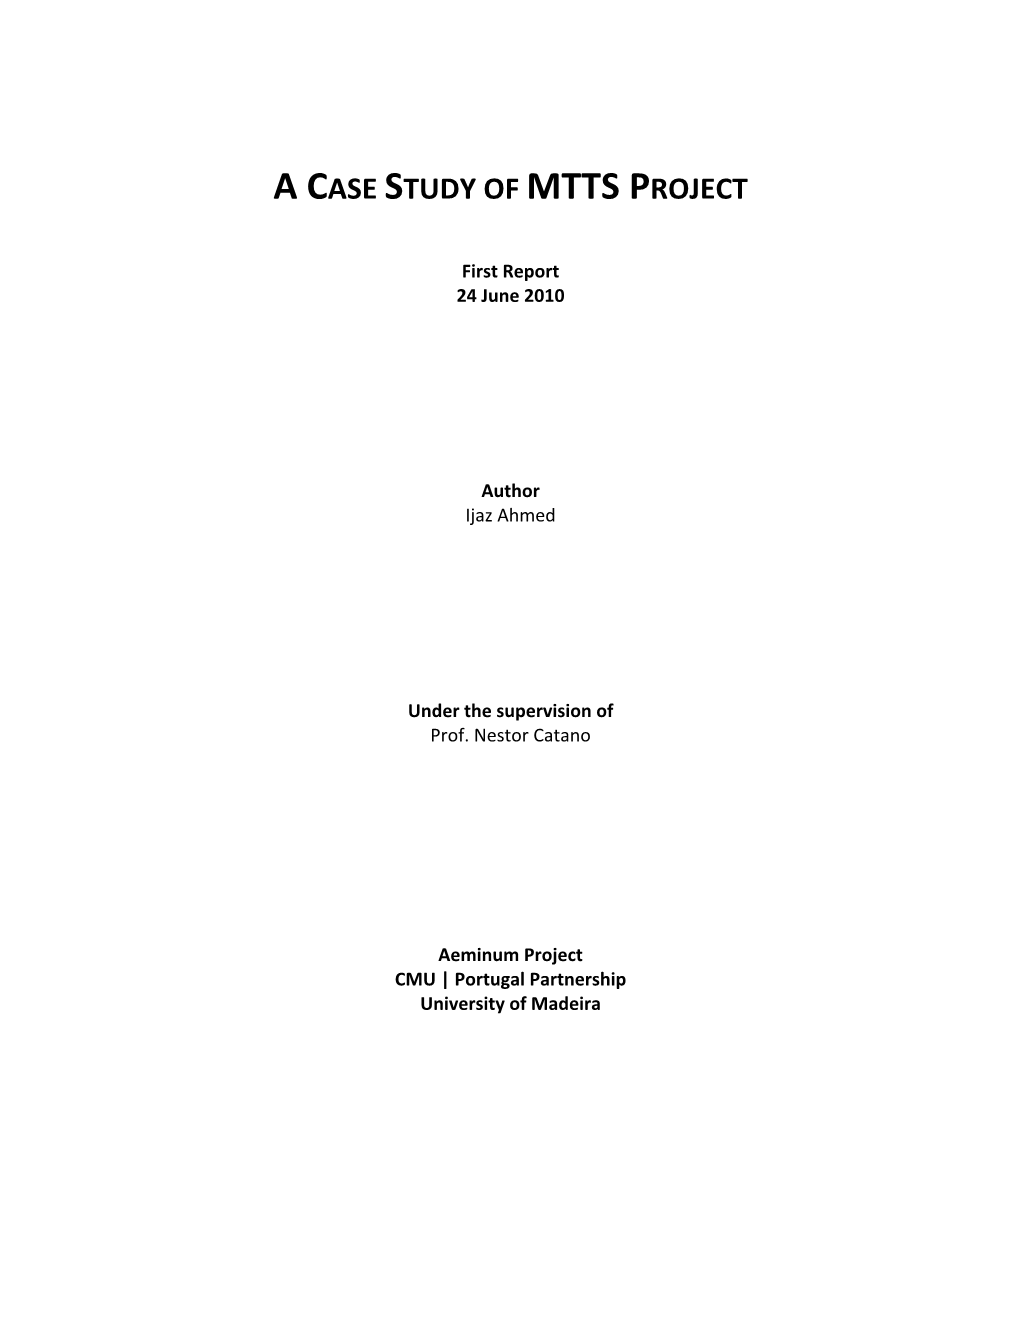 A Case Study of Mtts Project